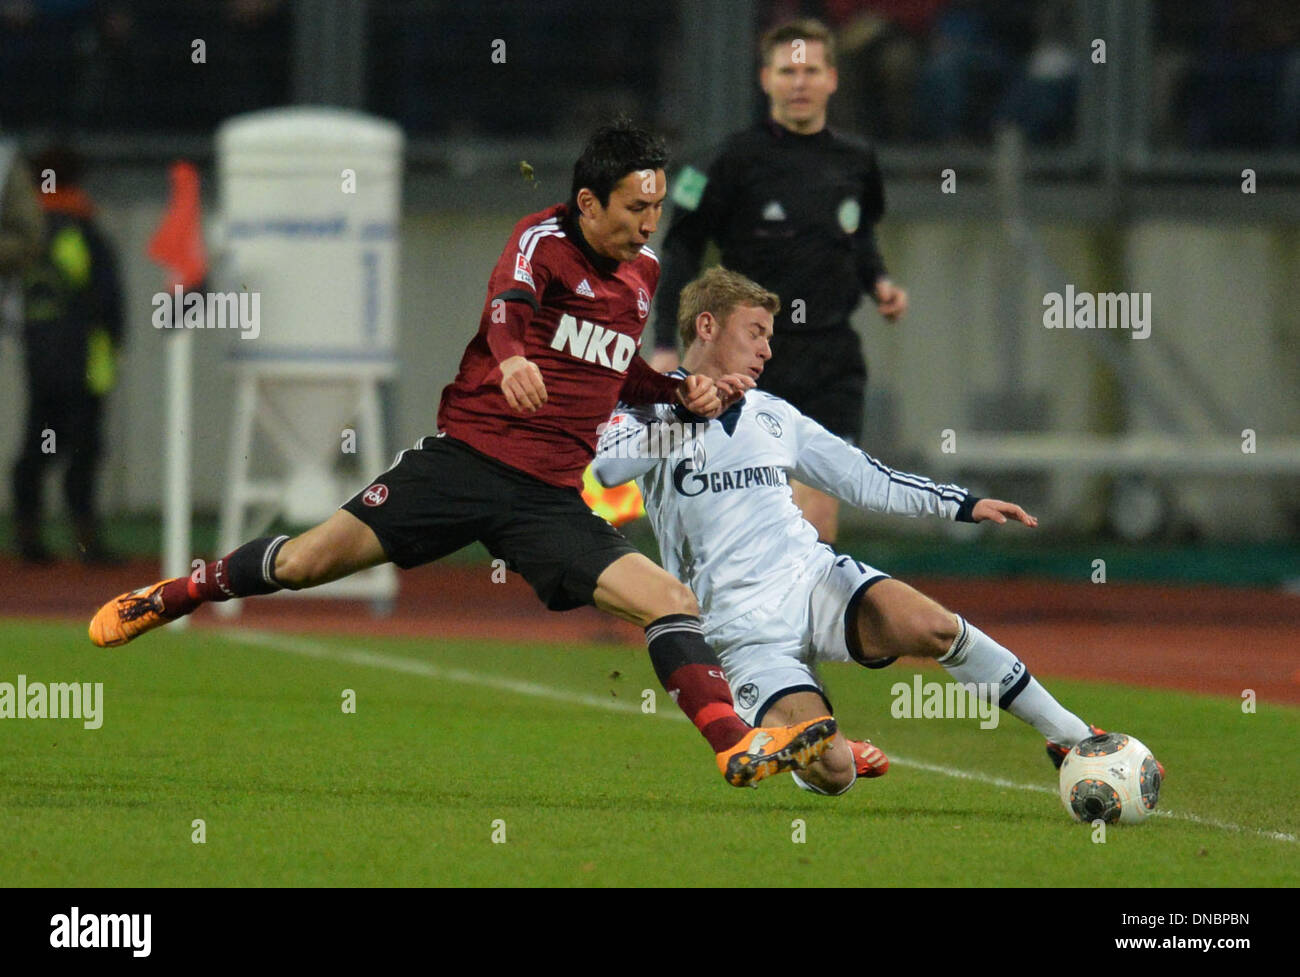 Nuremberg, Germany. 21st Dec, 2013. Nuremberg's Makoto Hasabe (L) vies for the ball with Schalke's Maximilian Meyer during the German Bundesliga match between FC Nuremberg and FC Schalke 04 at Grundig Stadium in Nuremberg, Germany, 21 December 2013. Photo: TIMM SCHAMBERGER (ATTENTION: Due to the accreditation guidelines, the DFL only permits the publication and utilisation of up to 15 pictures per match on the internet and in online media during the match.)/dpa/Alamy Live News Stock Photo